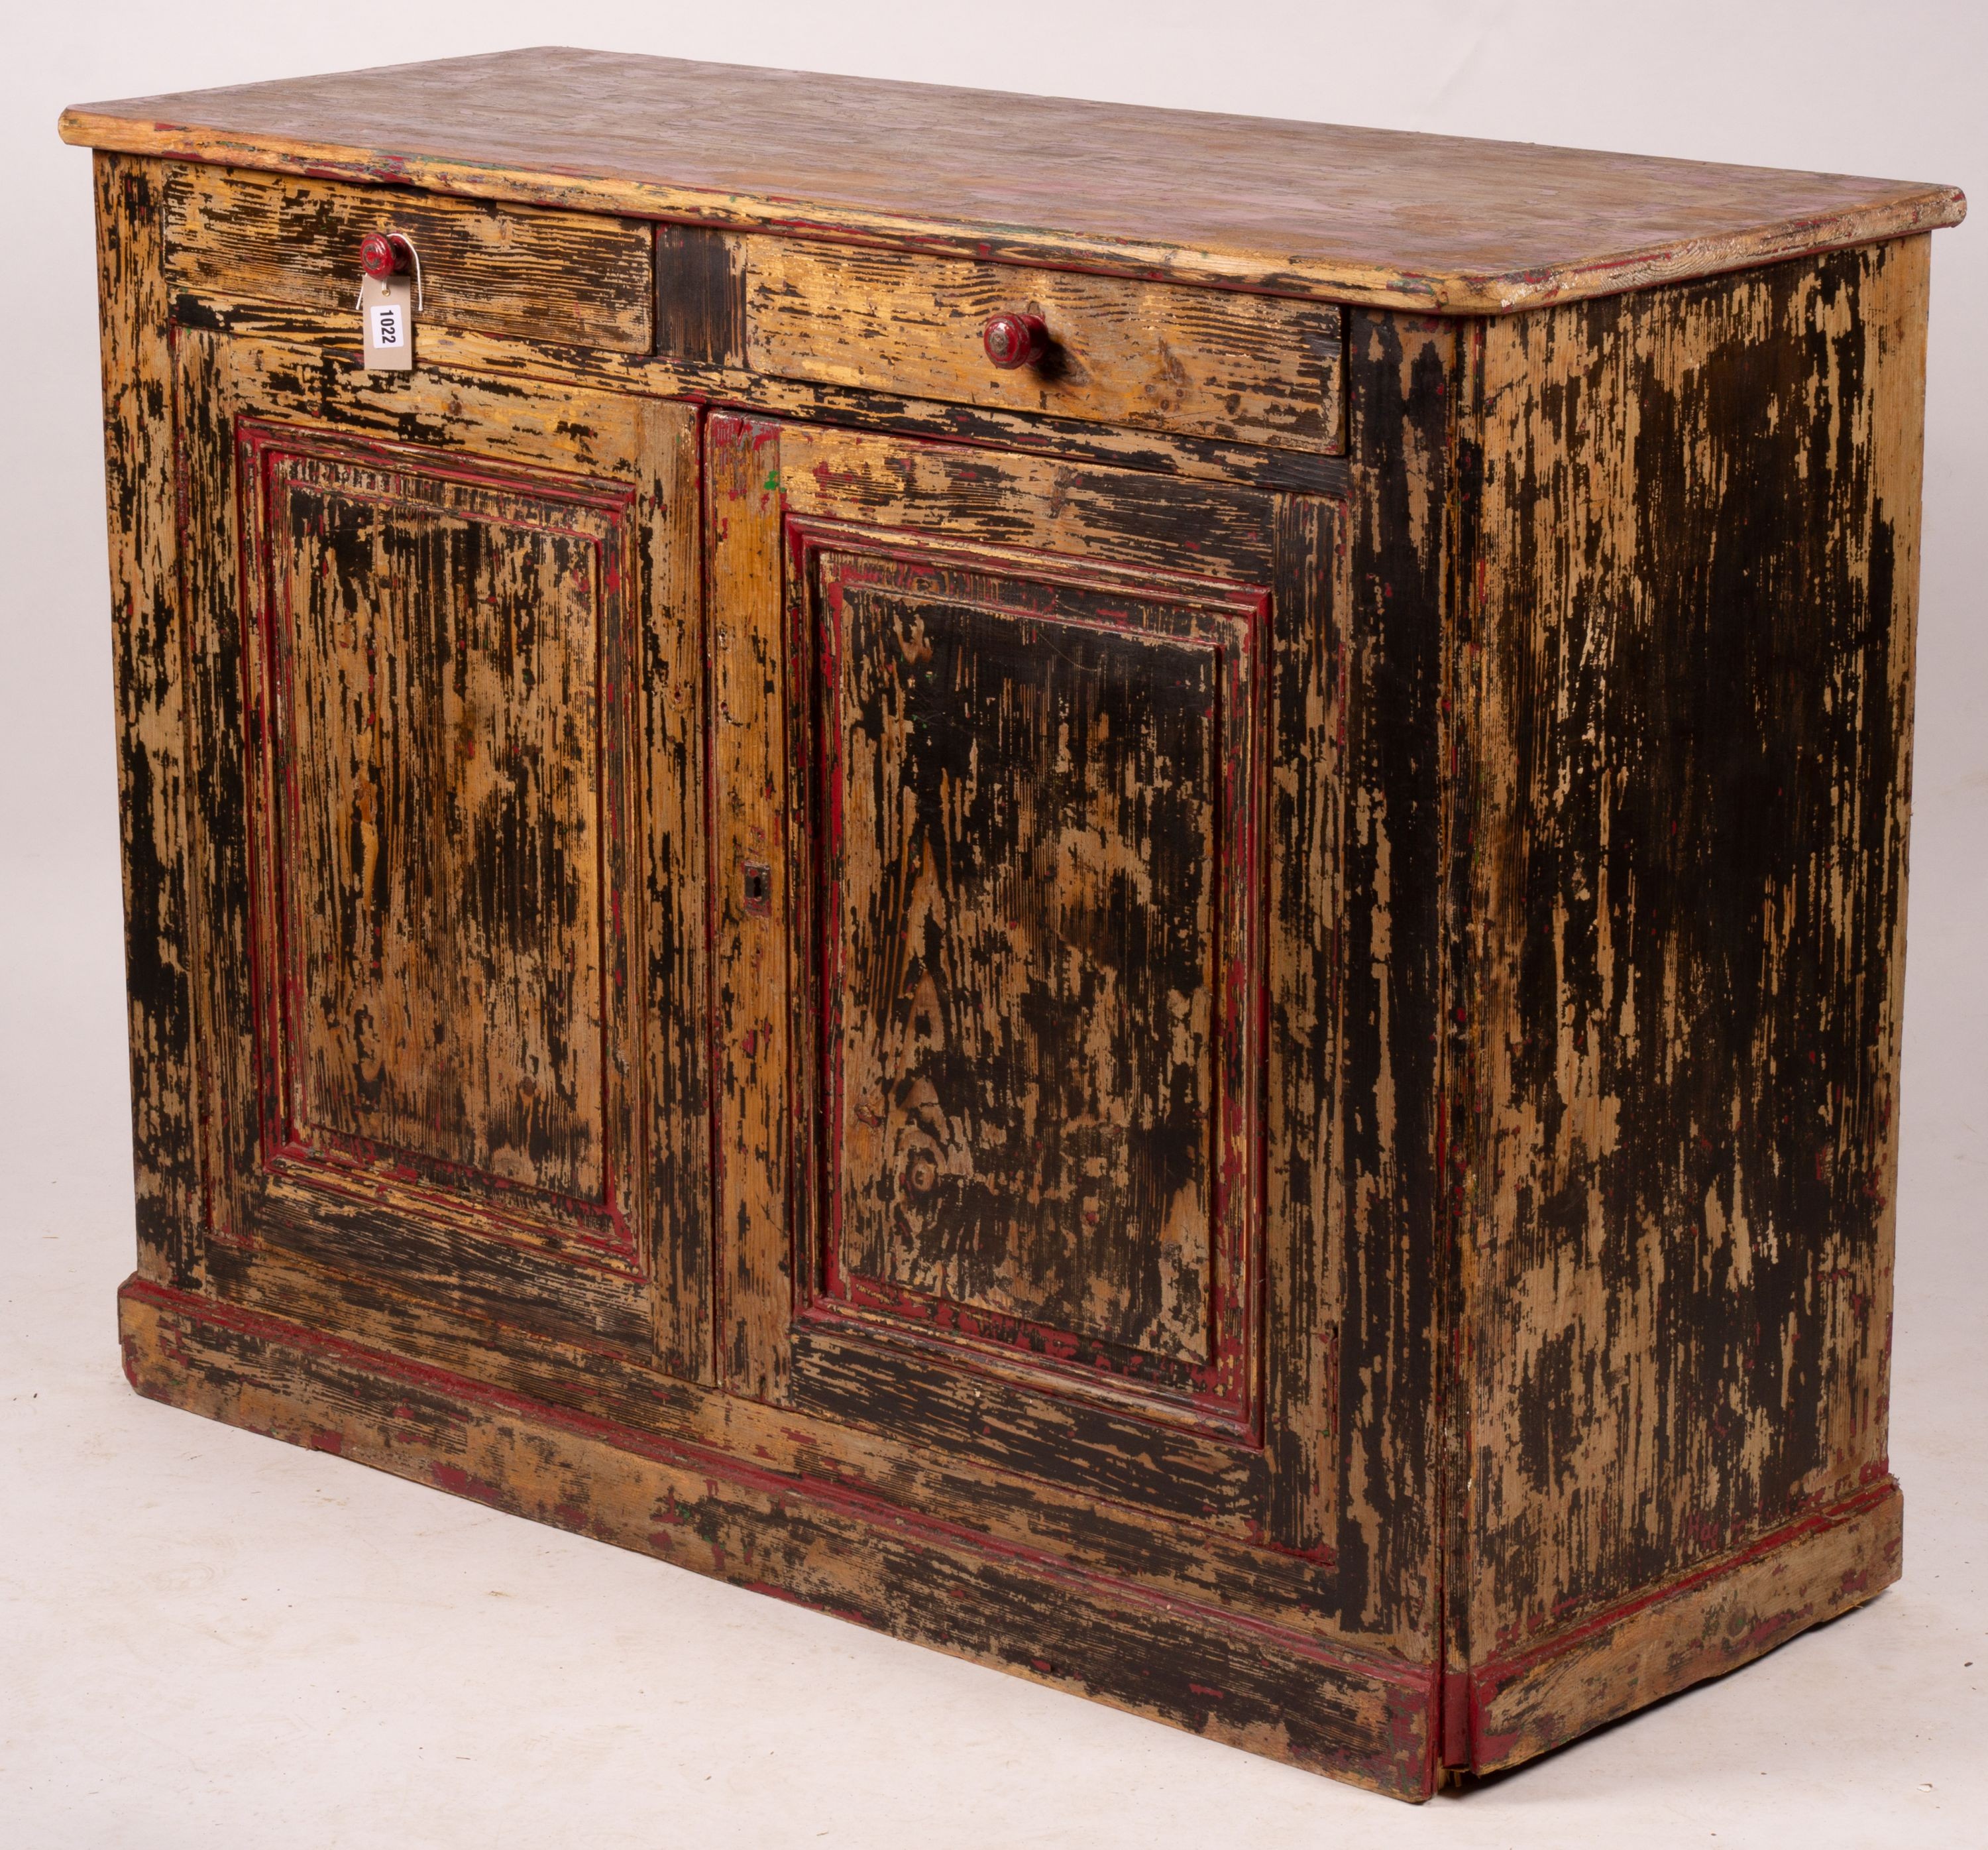 A 19th century French painted pine two door cabinet with scraped finish, width 140cm, depth 57cm, height 105cm